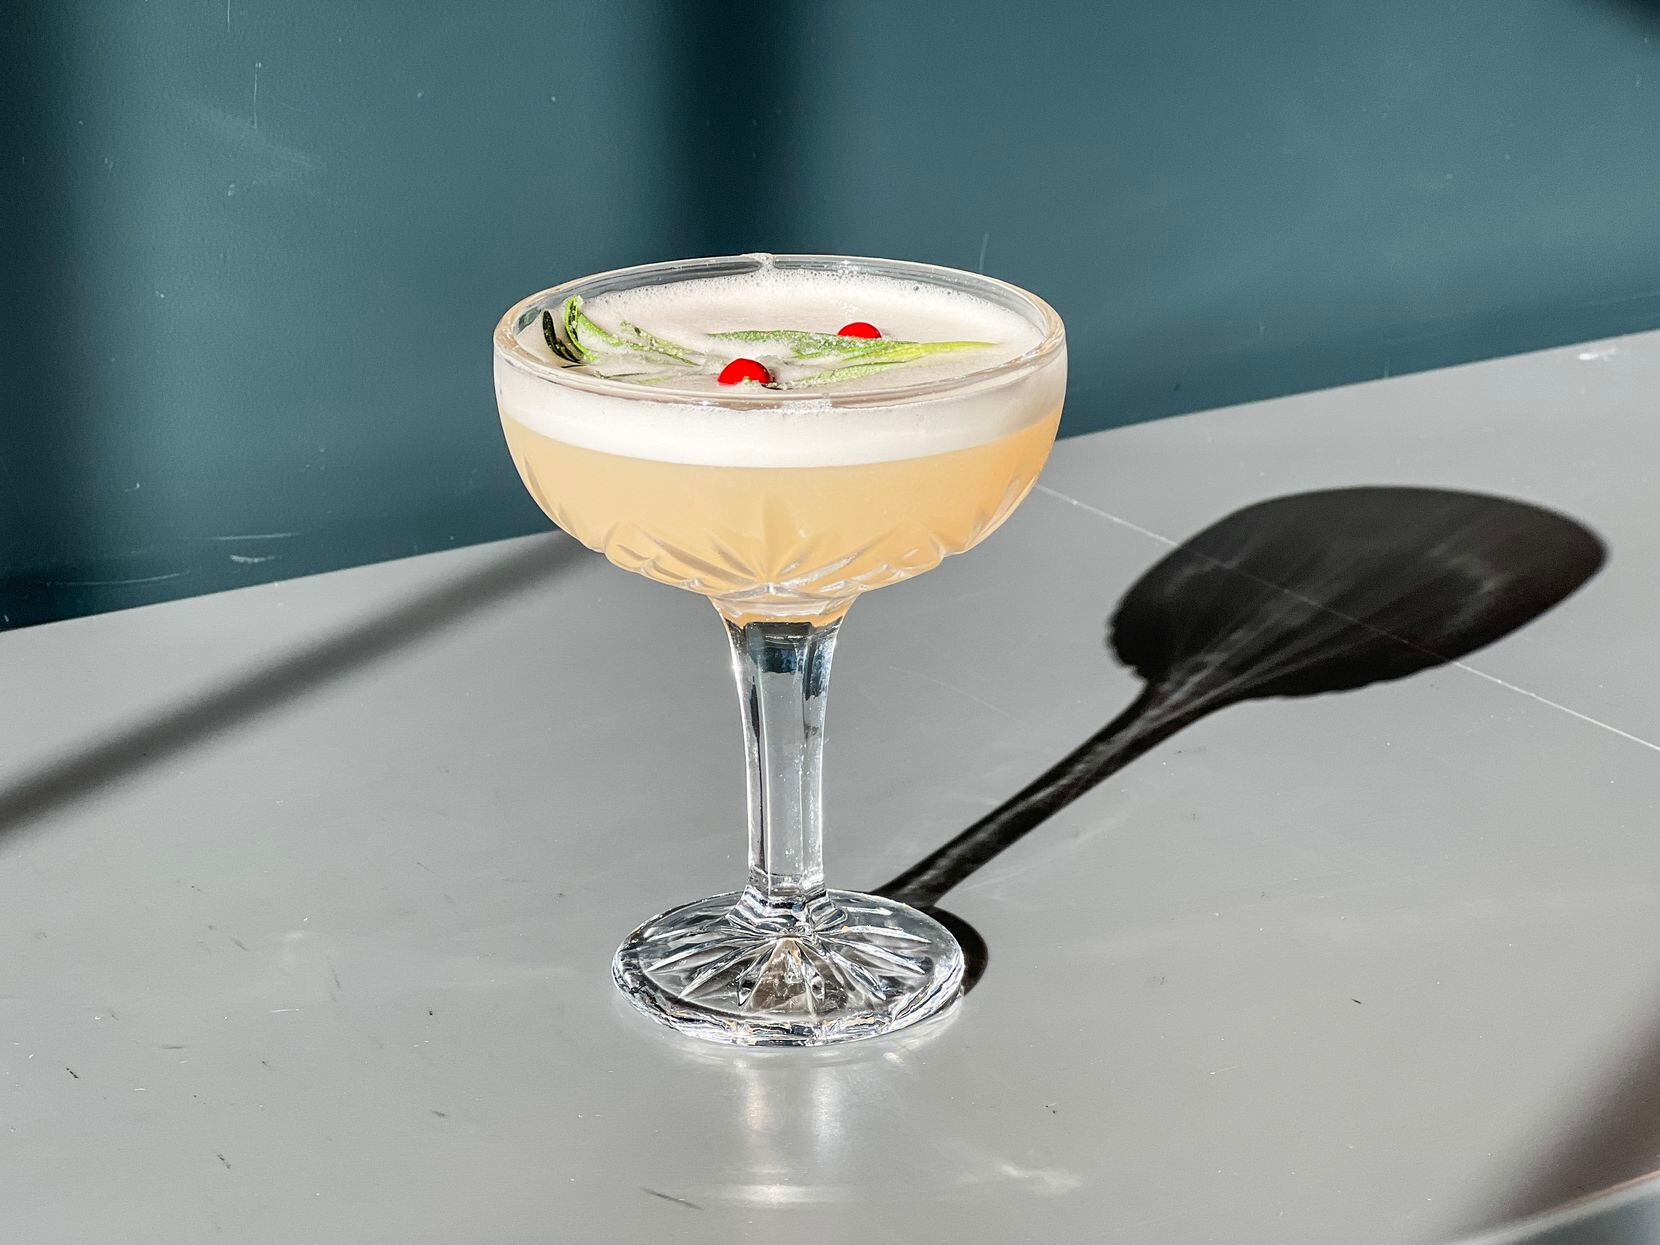 Bacchus Kitchen and Bar at Hotel Vin is serving holiday cocktails this year, including the Jack Frost.